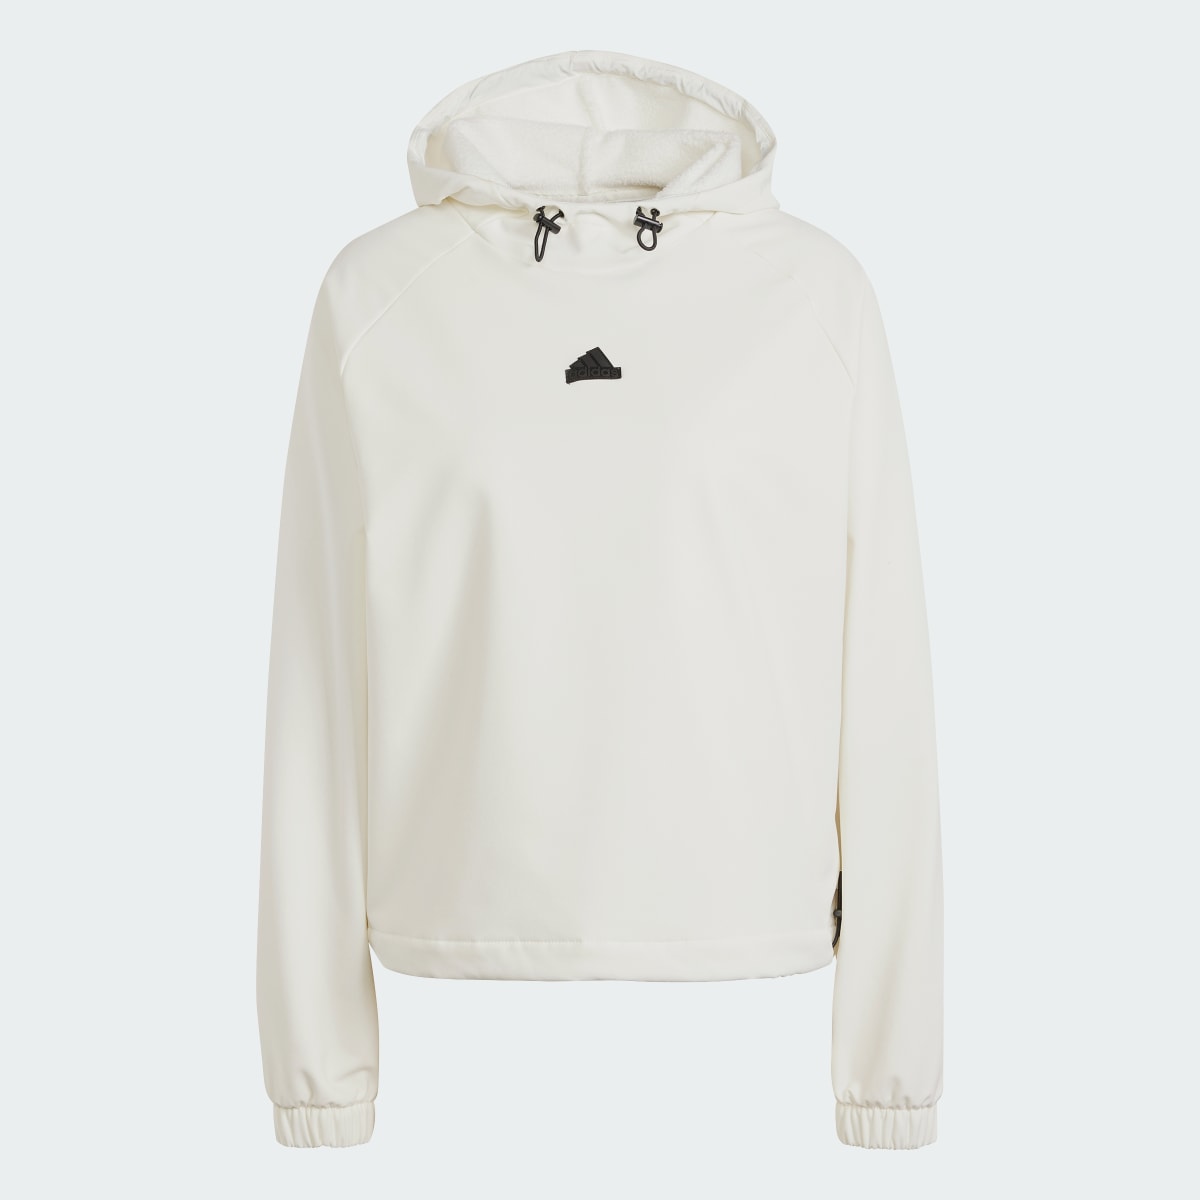 Adidas City Escape Bungee Cord Hoodie. 5